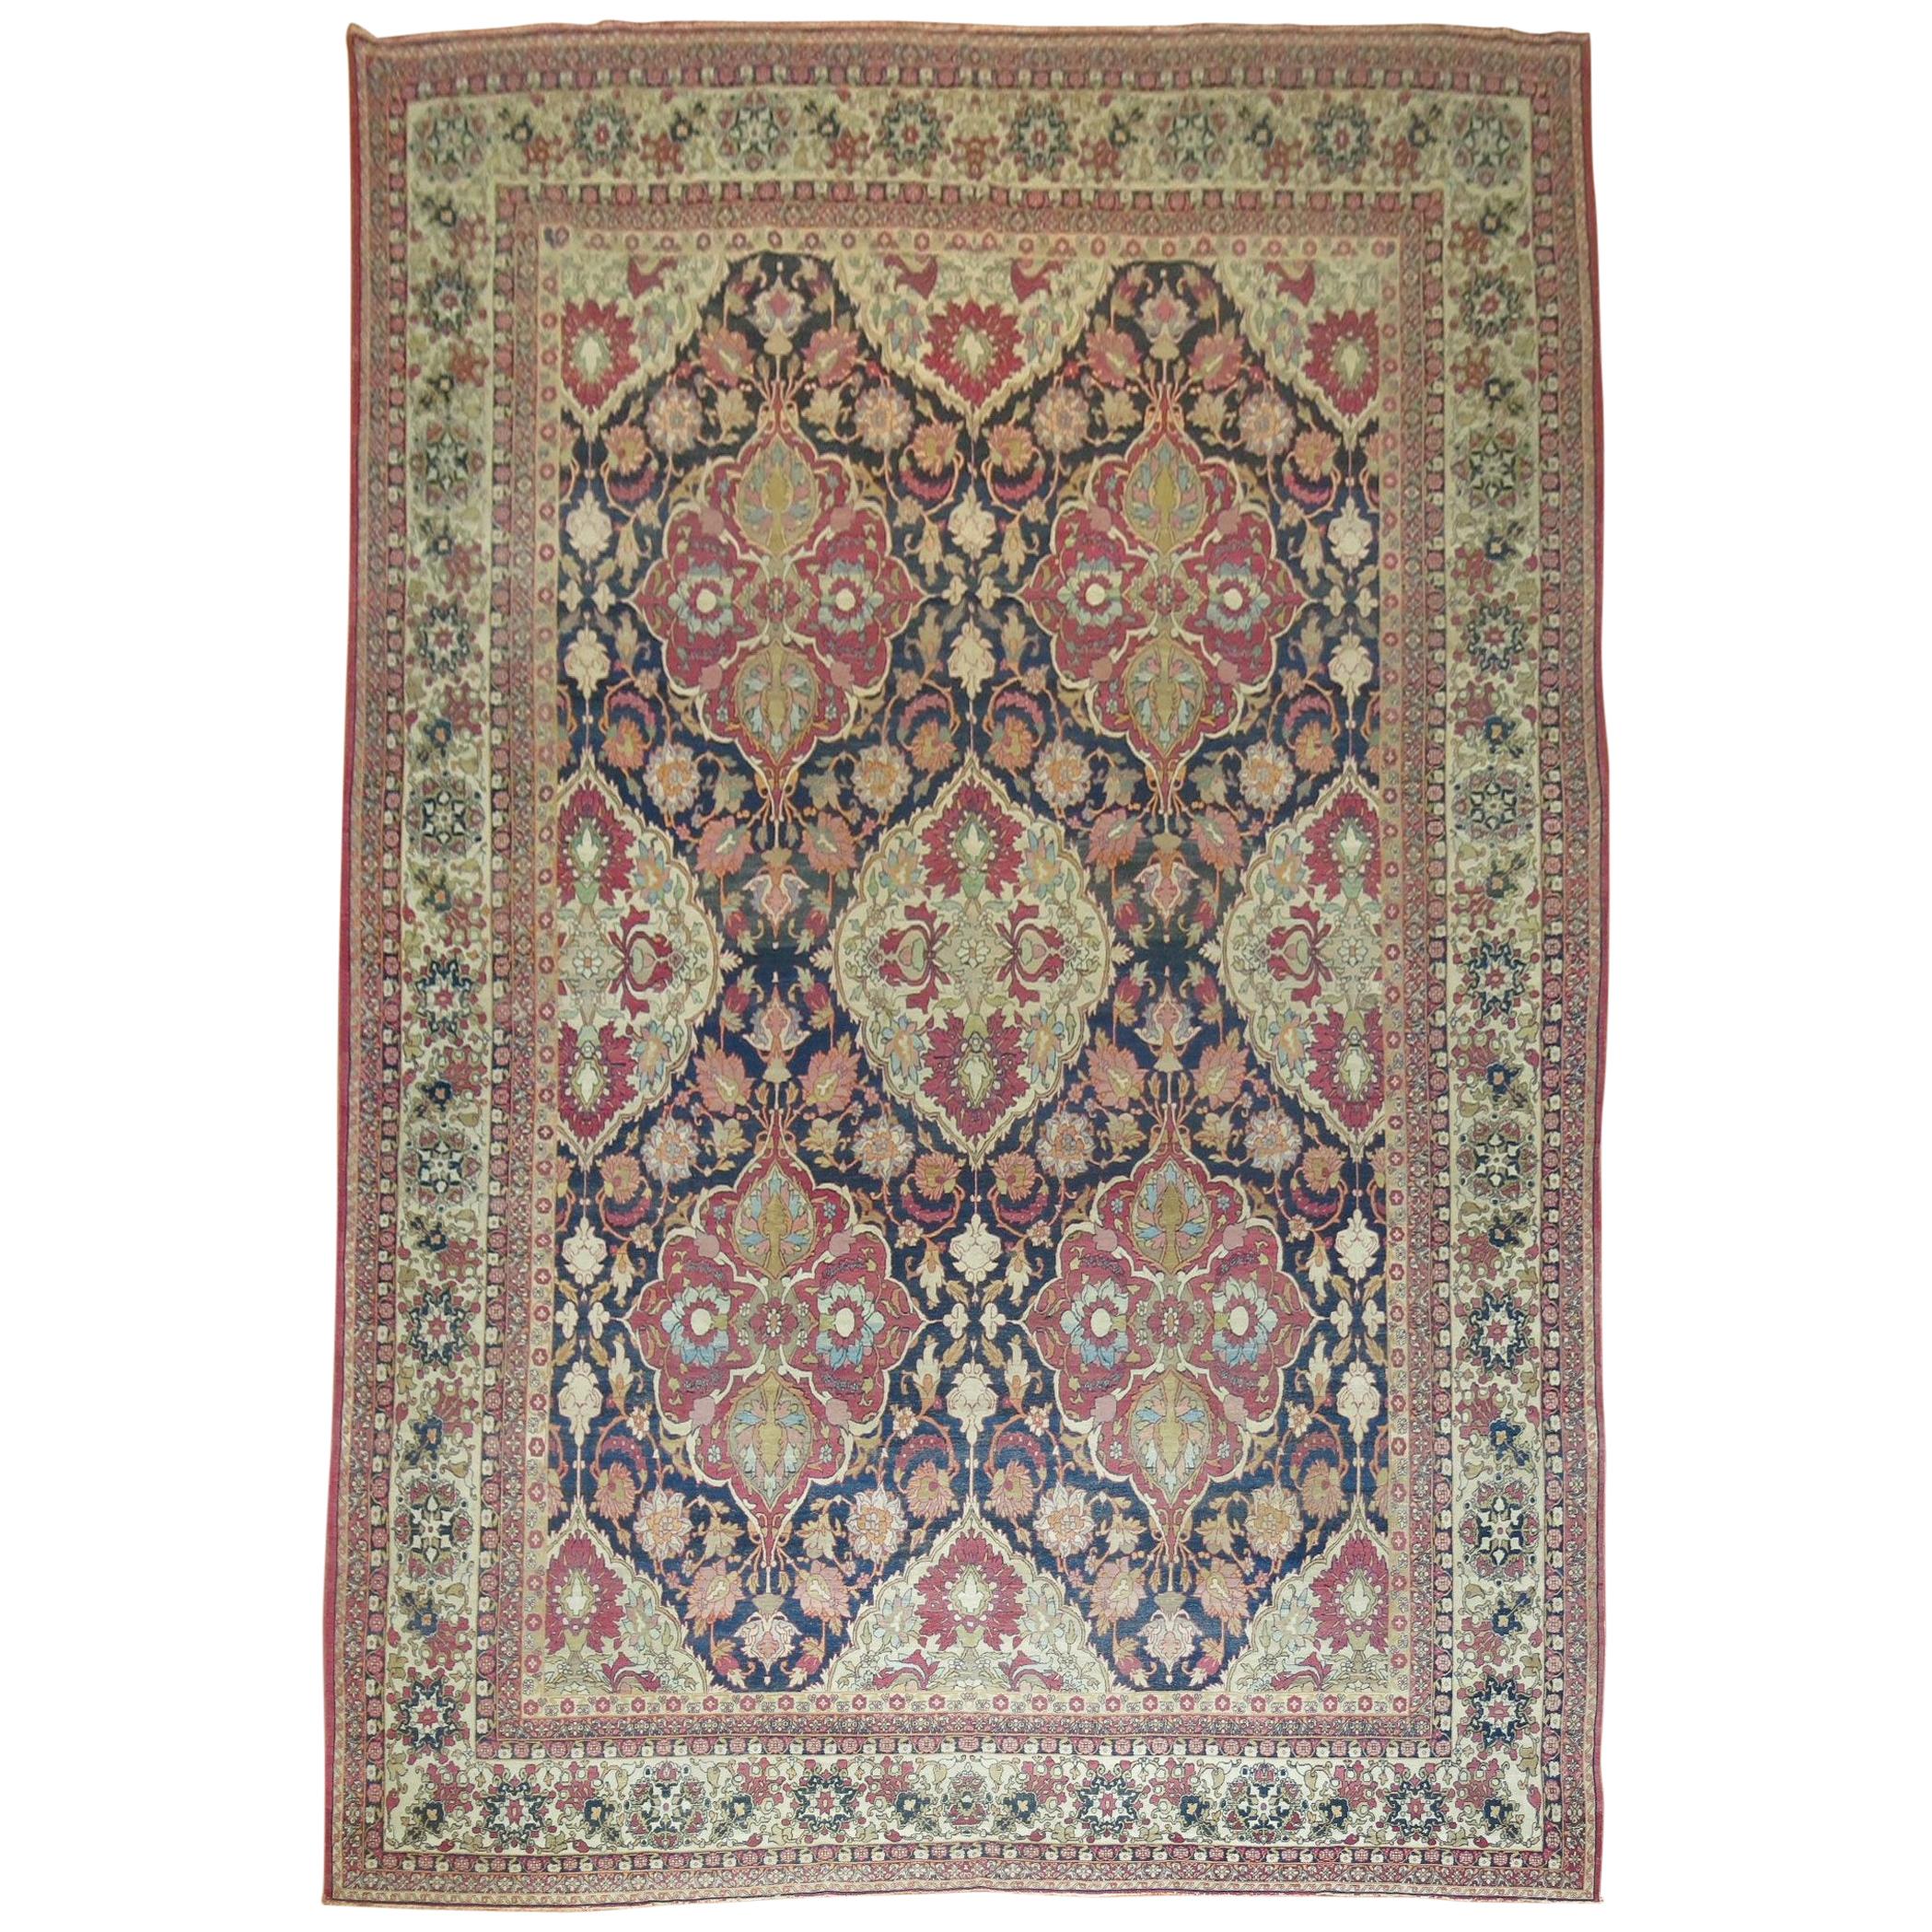 Spectacular Large Scale Traditional Kerman Rug